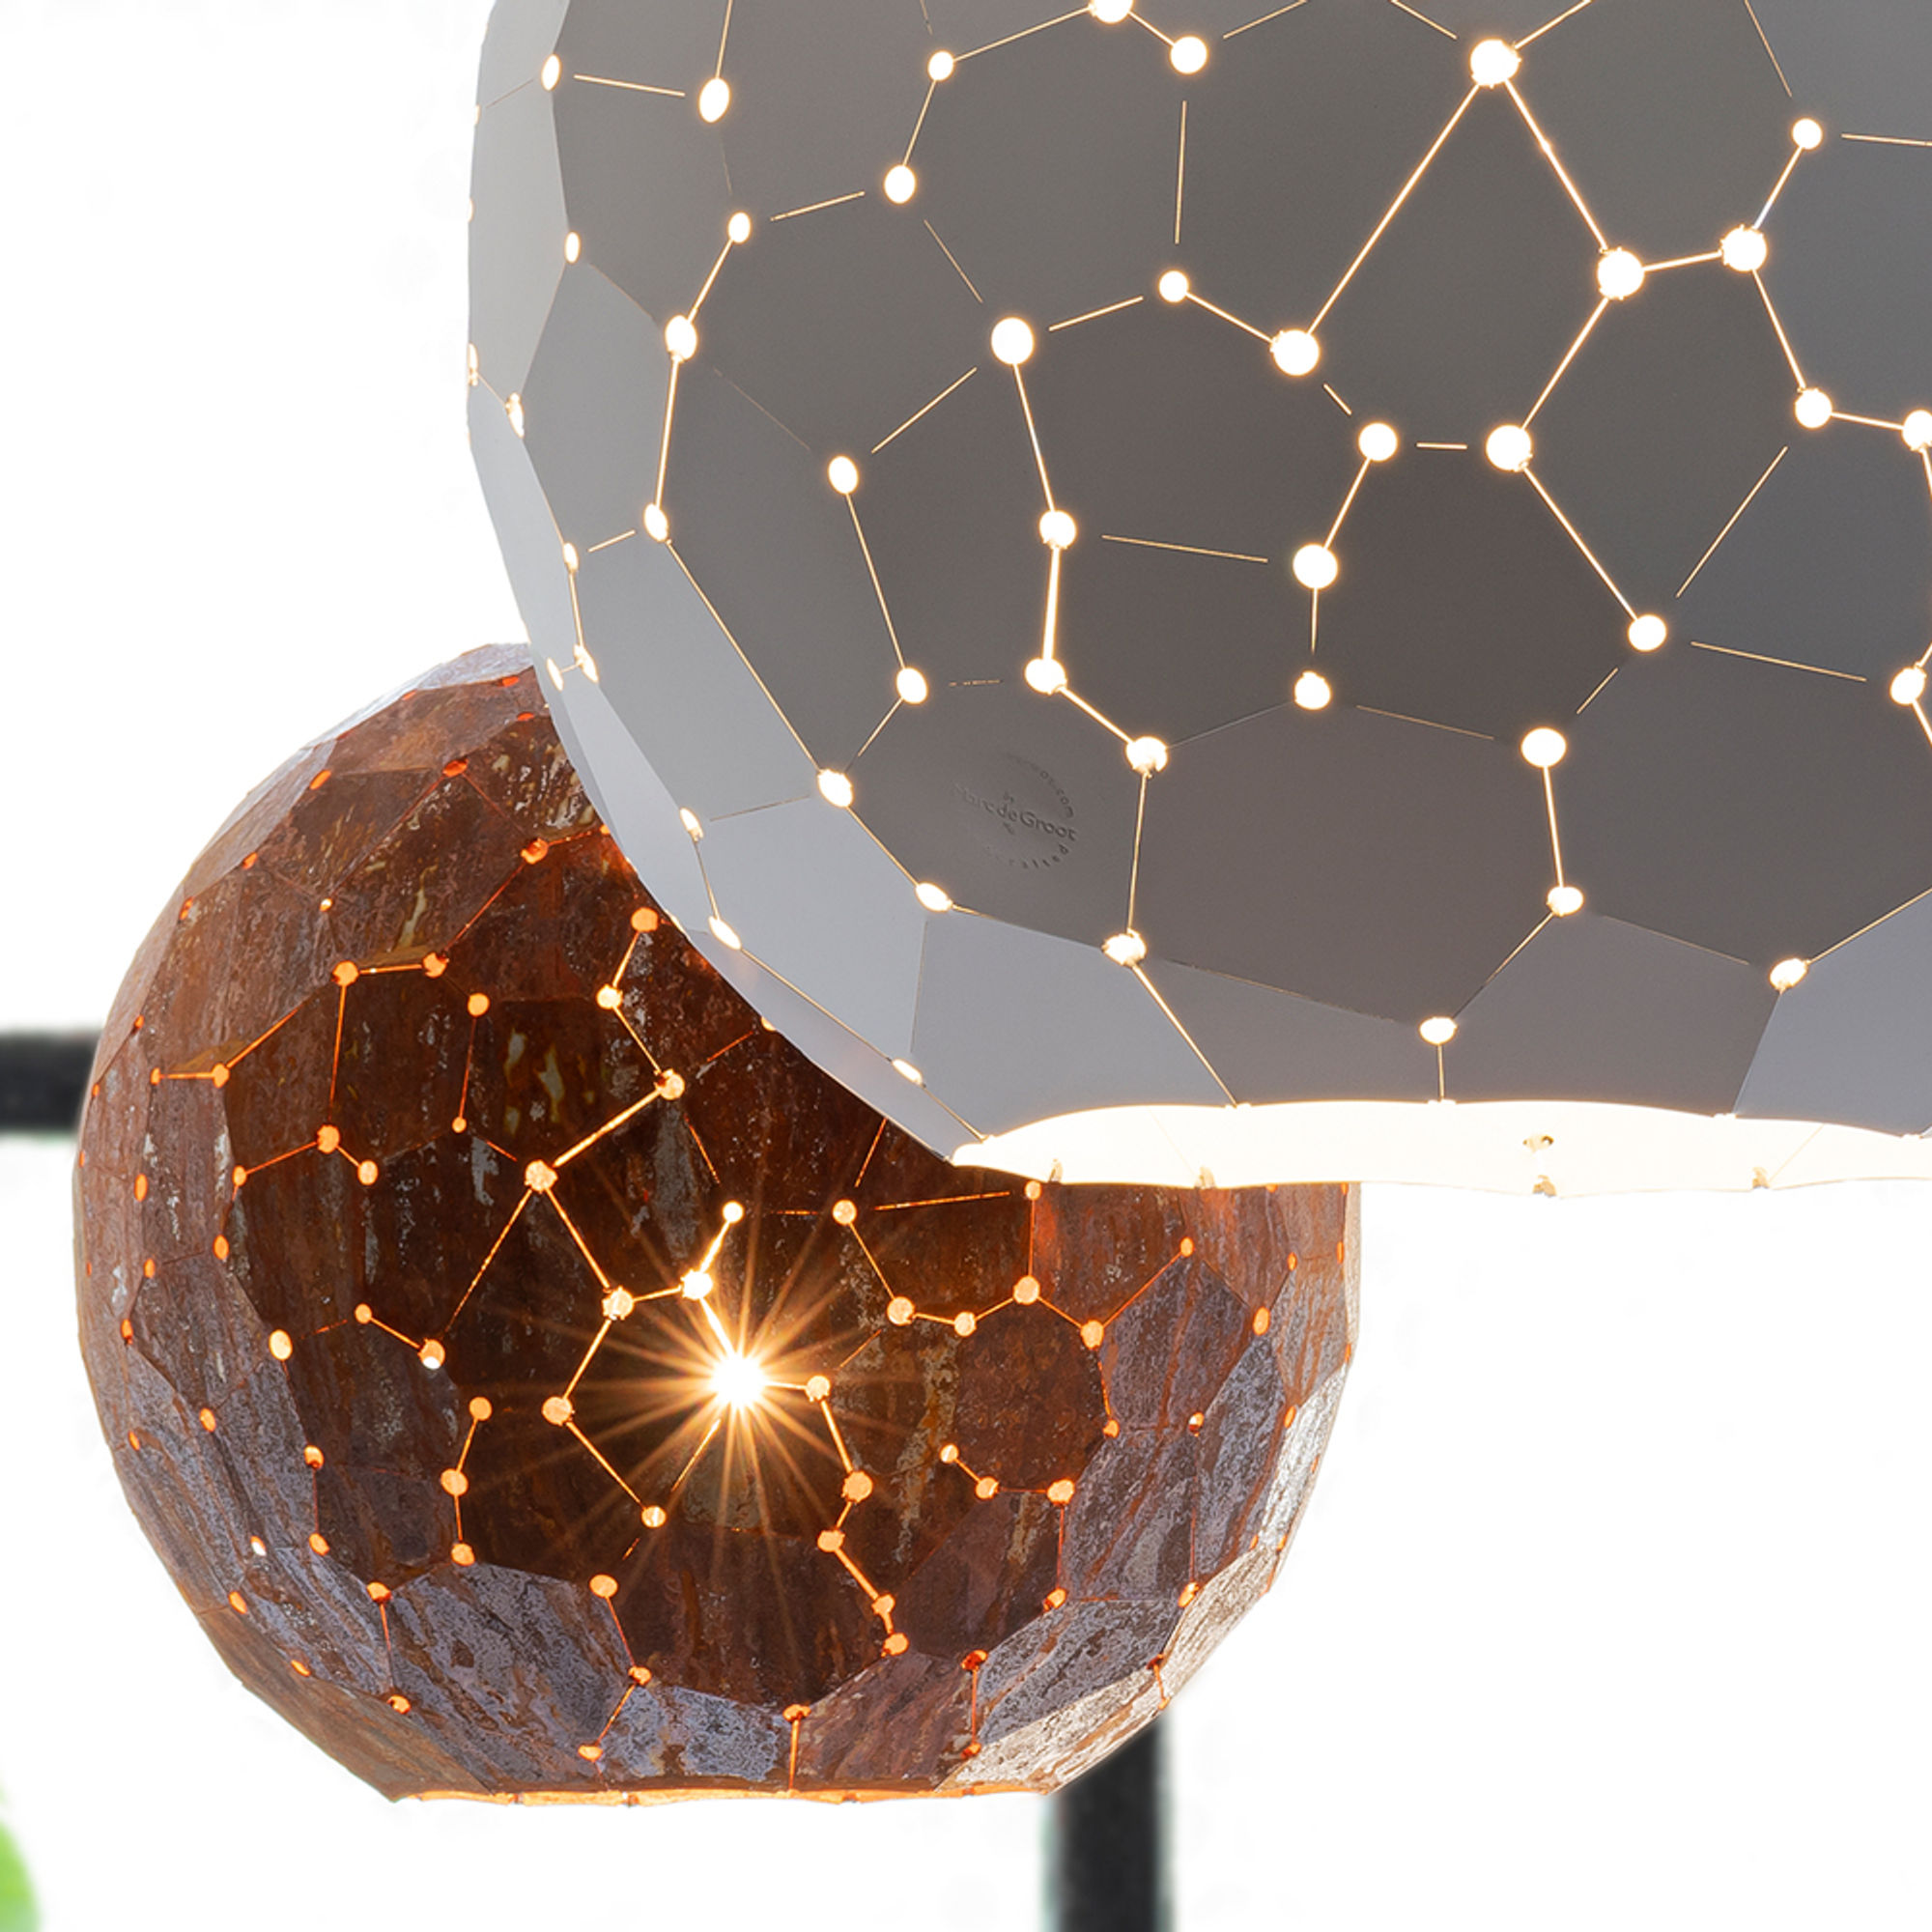 The StarDust 60 Pendant by By Marc de Groot 4